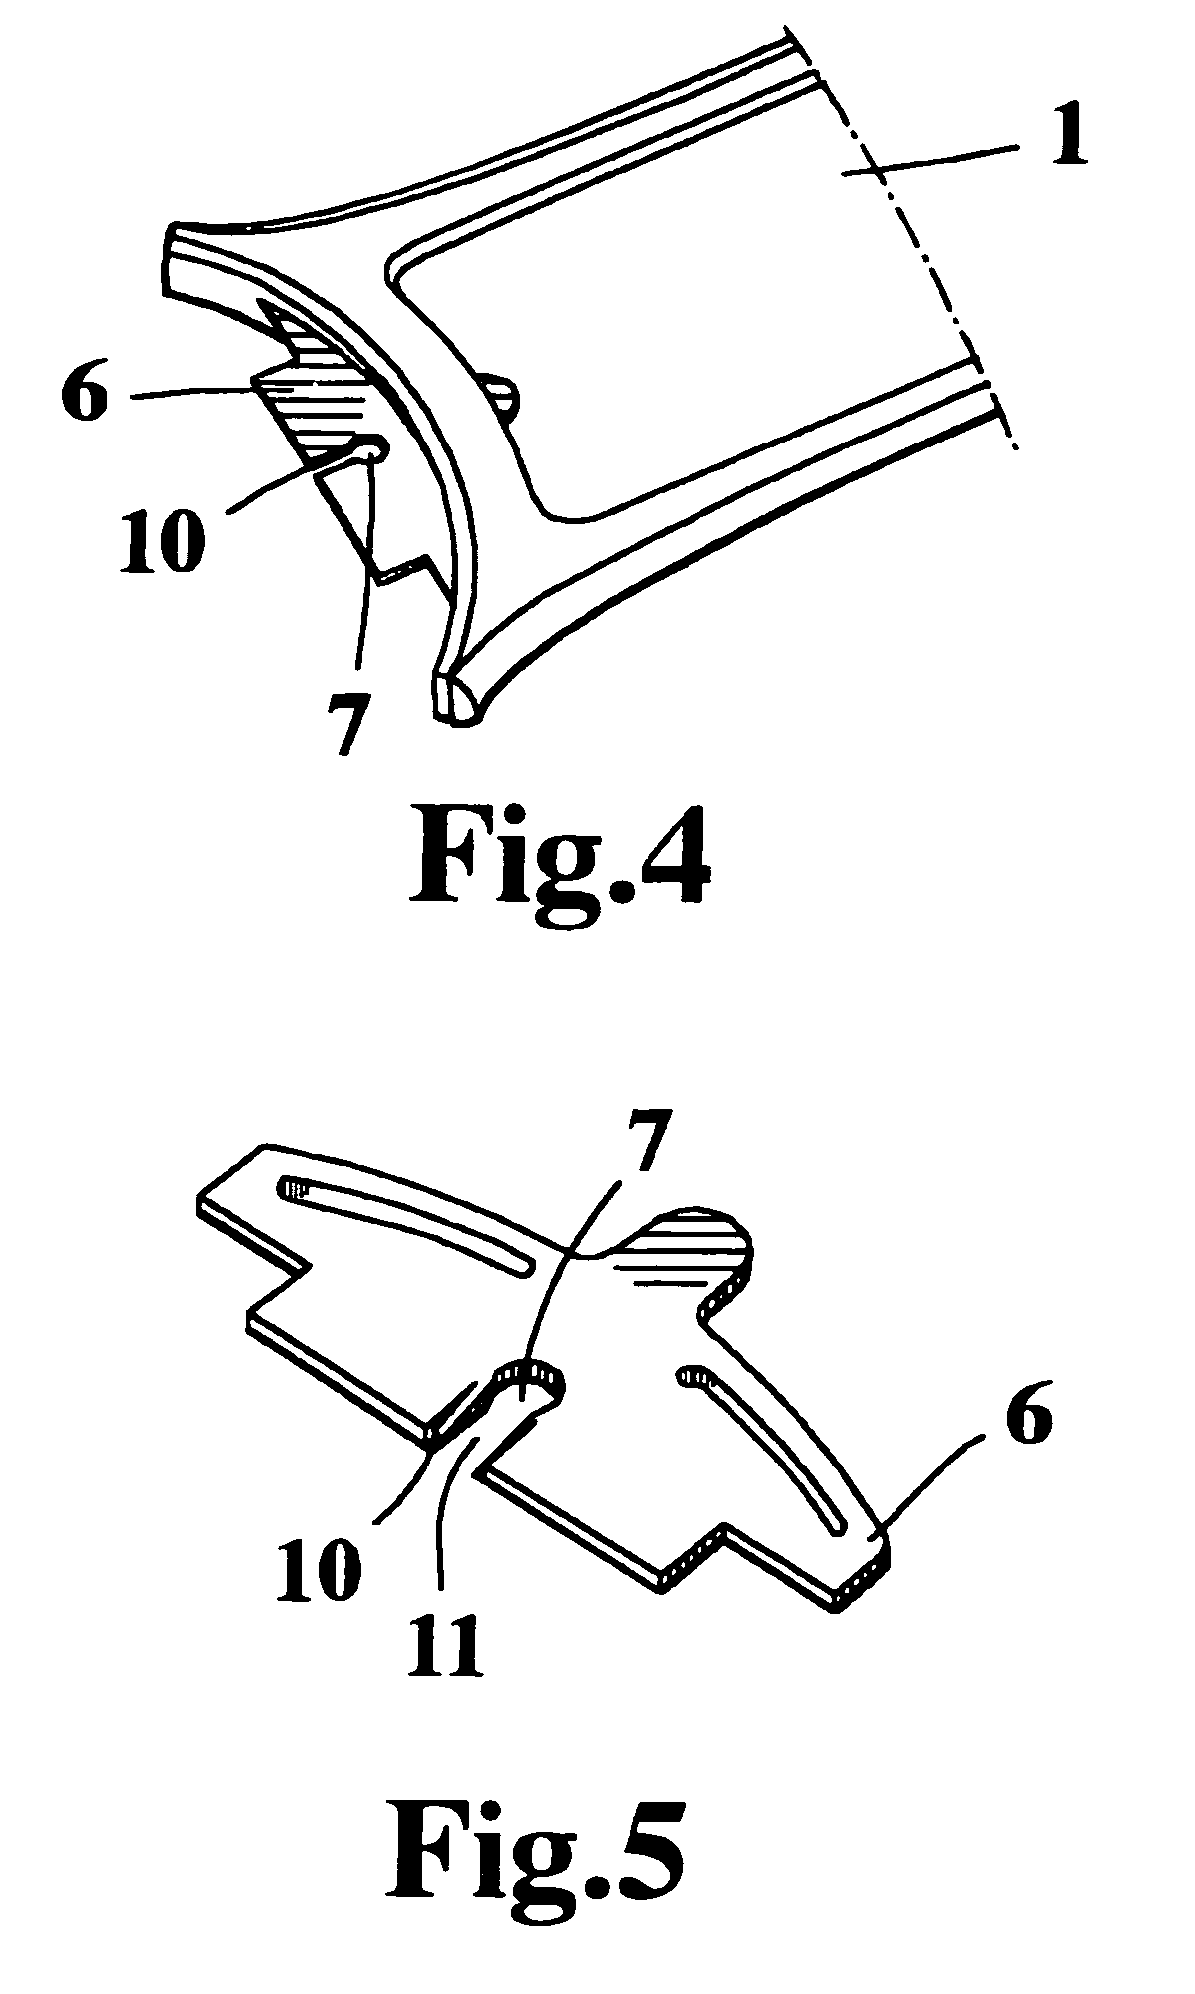 Strap attachment assembly